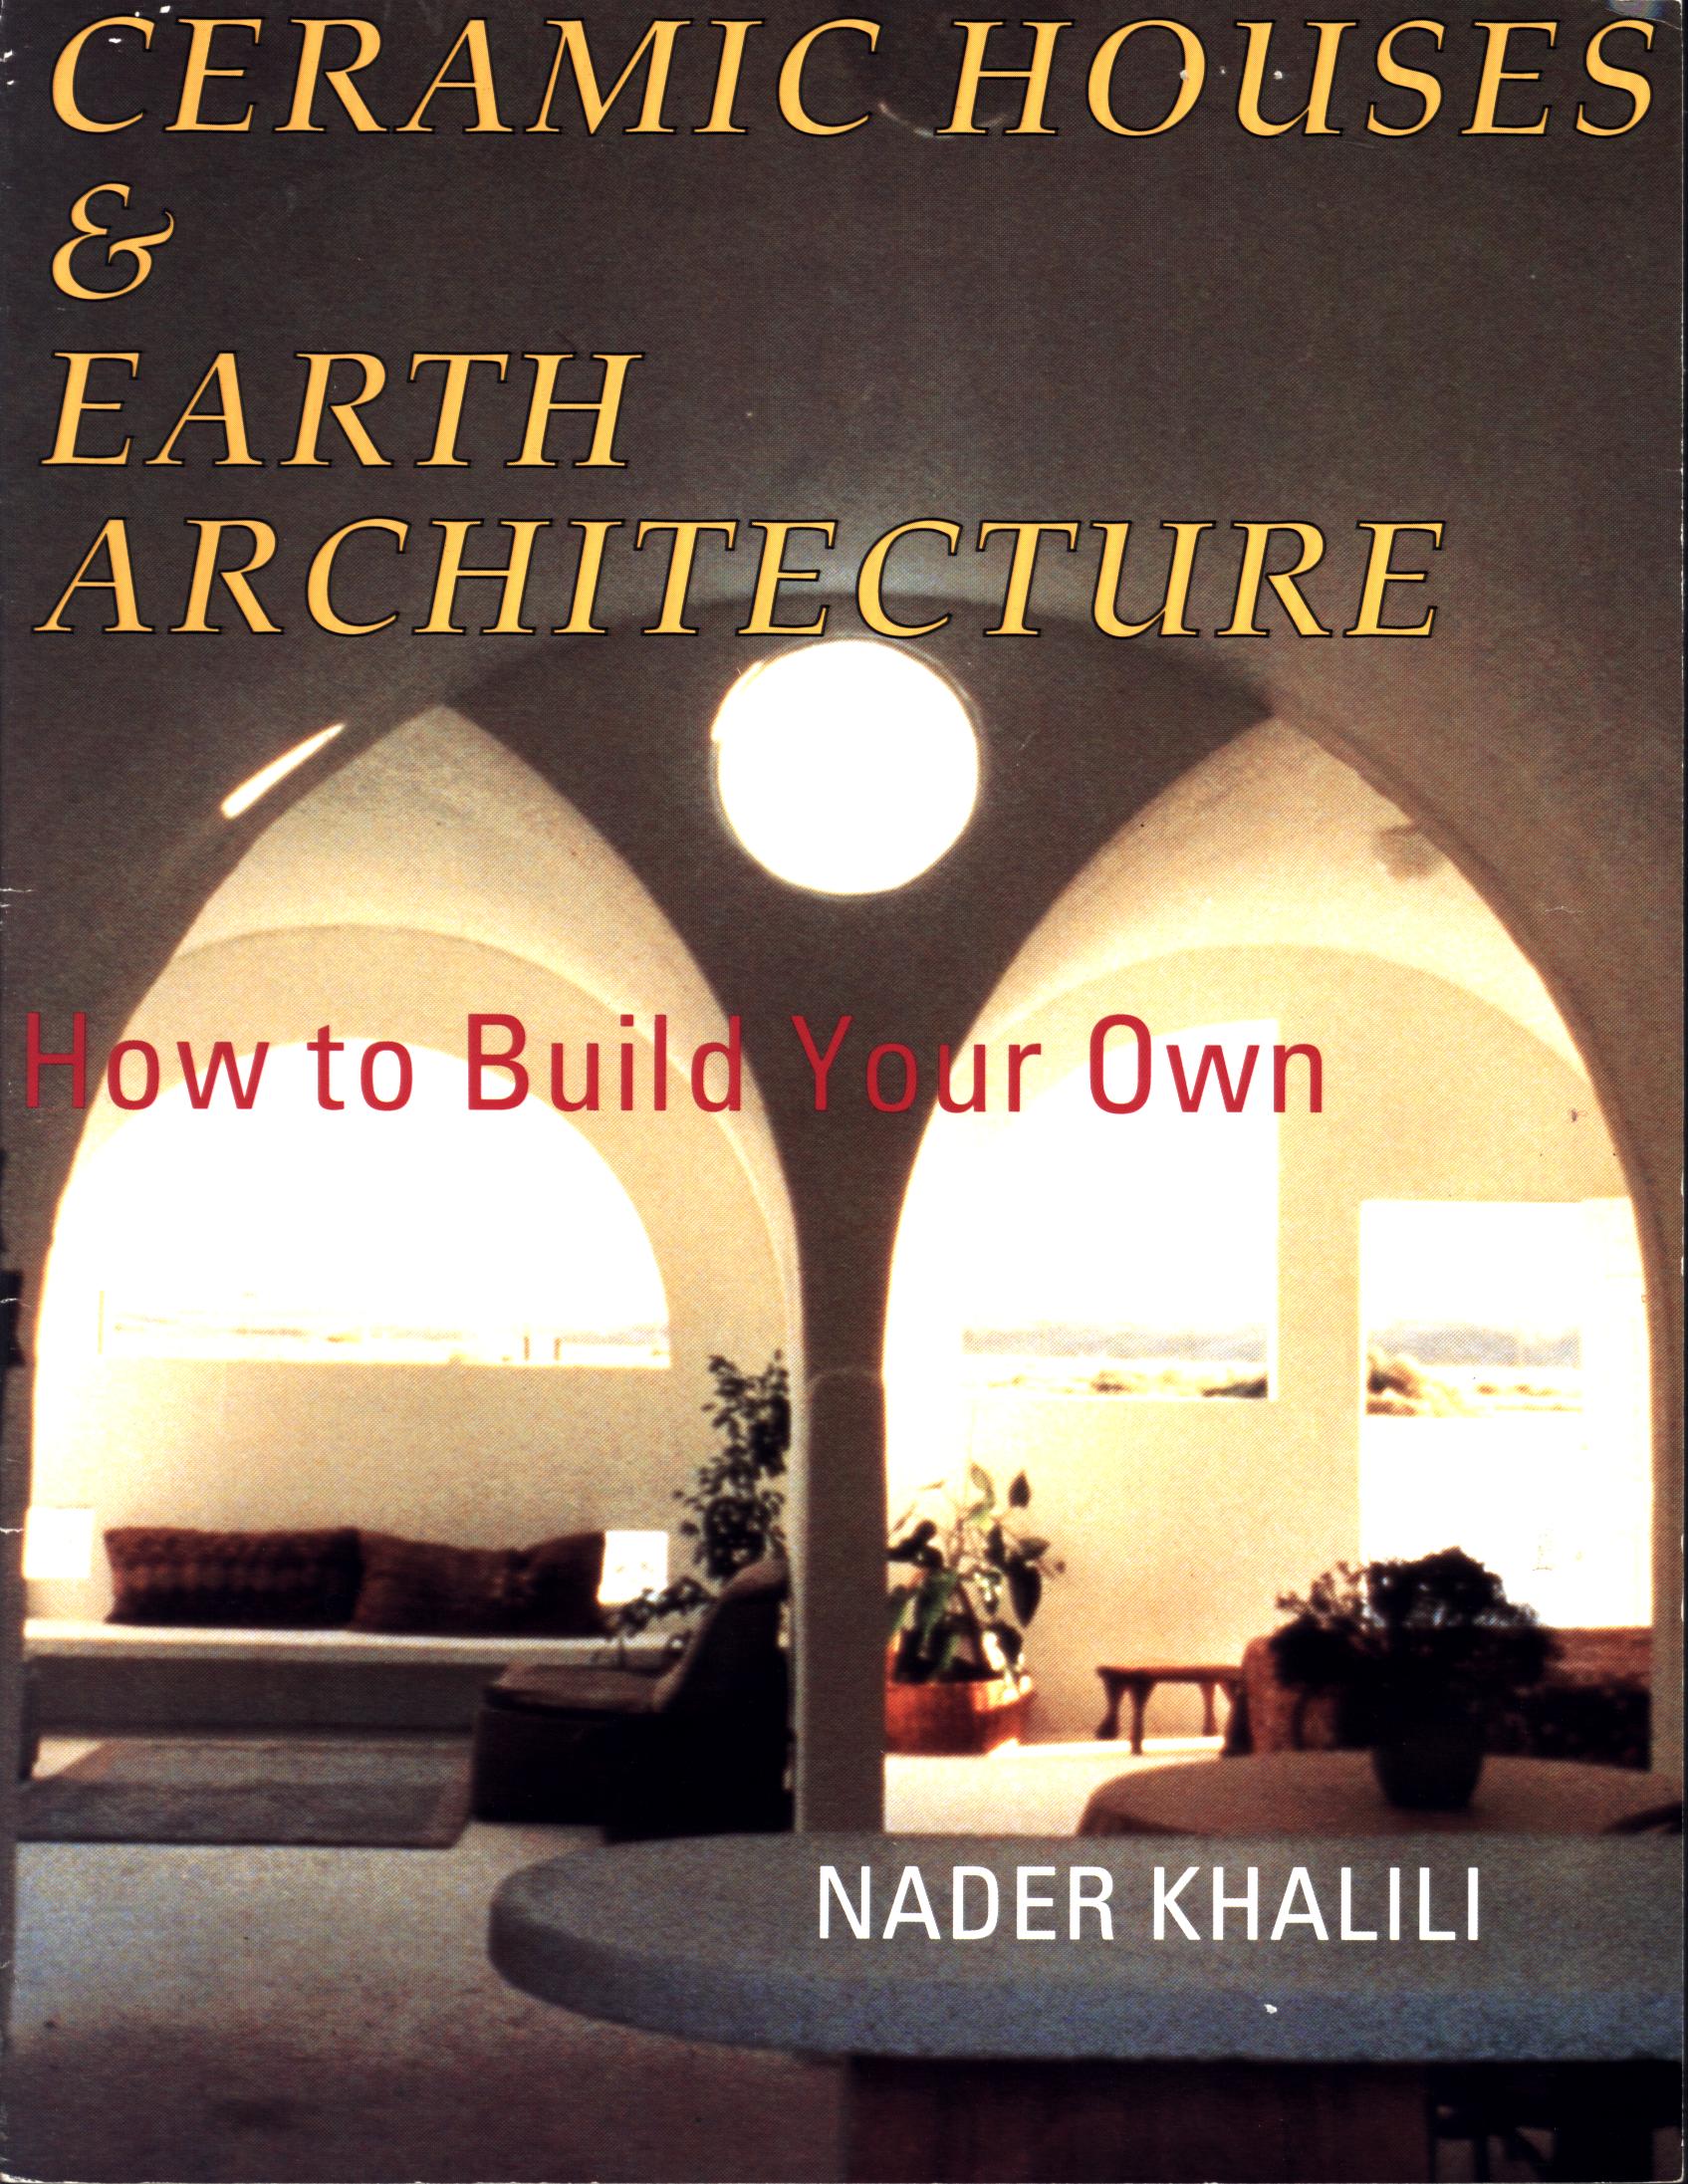 CERAMIC HOUSES & EARTH ARCHITECTURE: how to build your own.